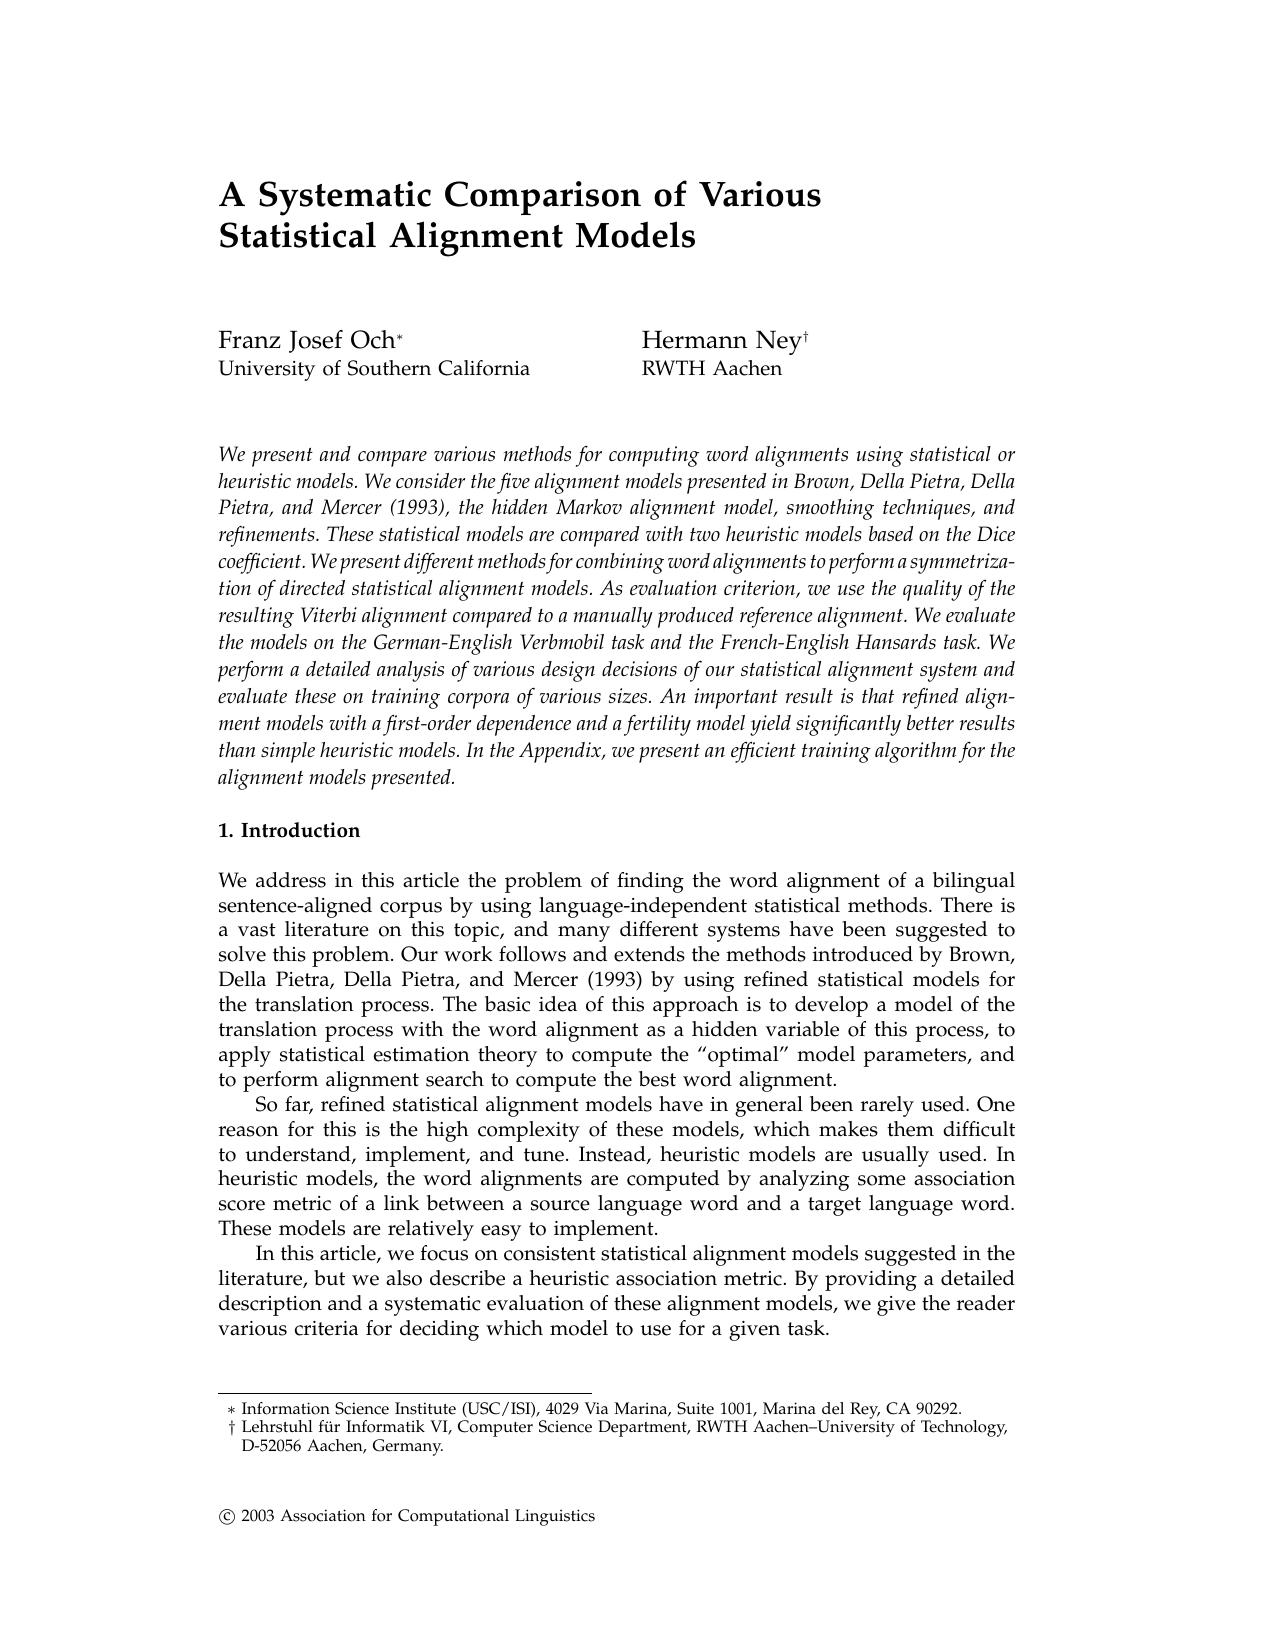 A Systematic Comparison of Various Statistical Alignment Models - Paper